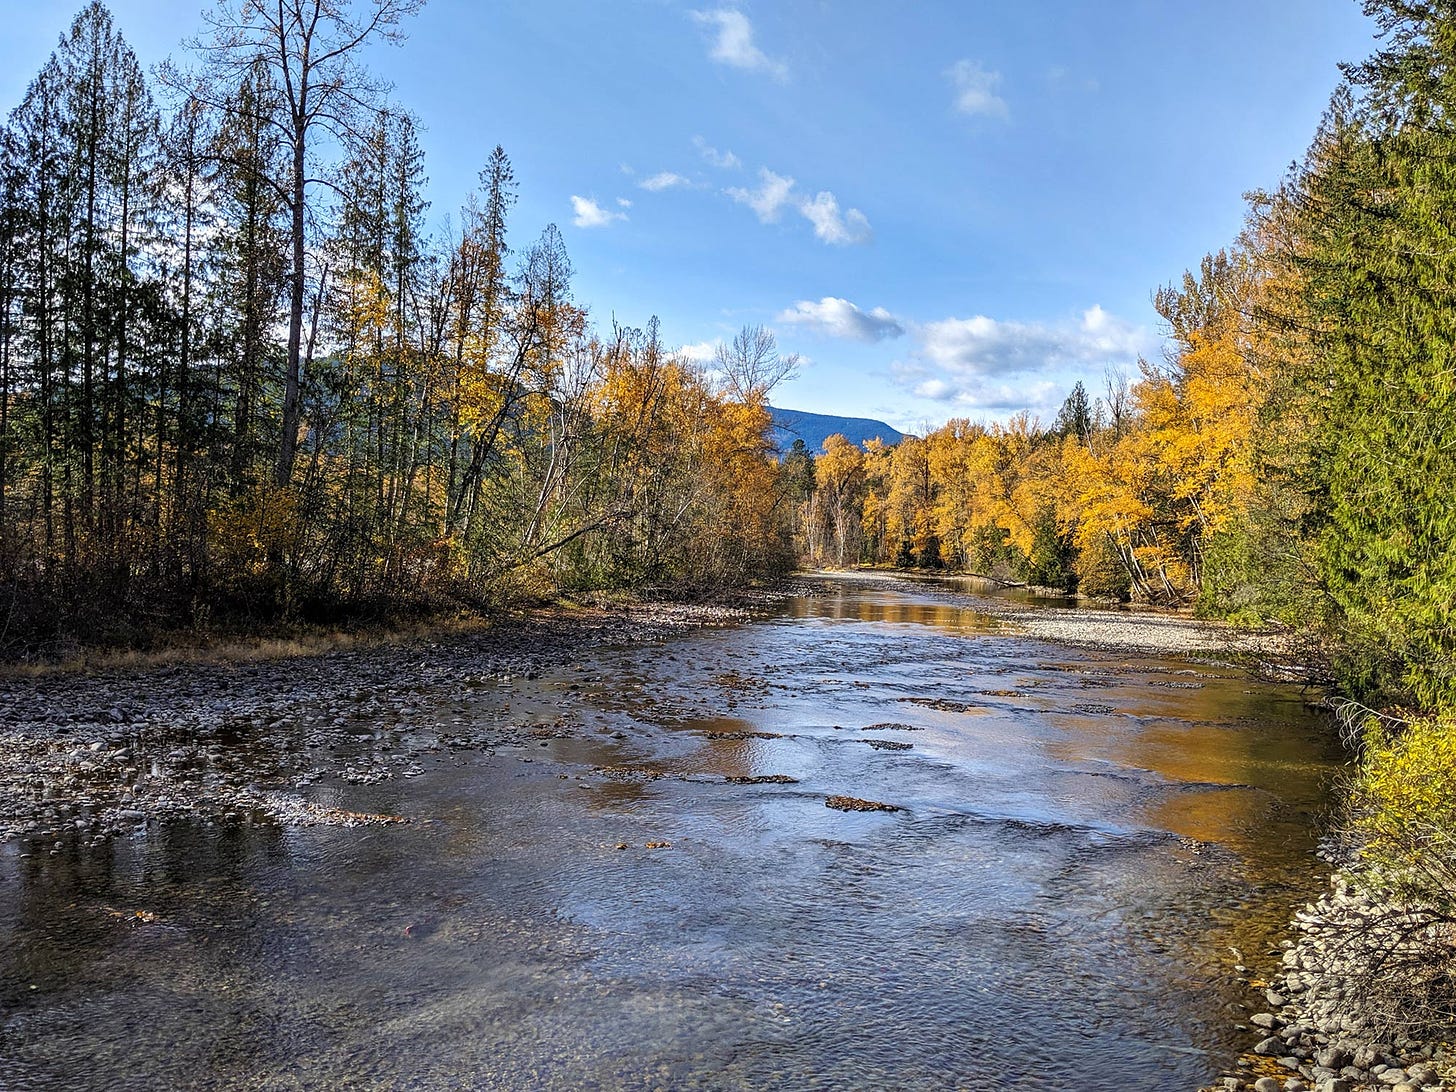 golden cottonwoods line the banks of a shallow side branch of the Adams River where salmon spawn in the gravelly riverbed - a red sockeye is barely visible in the lower left 